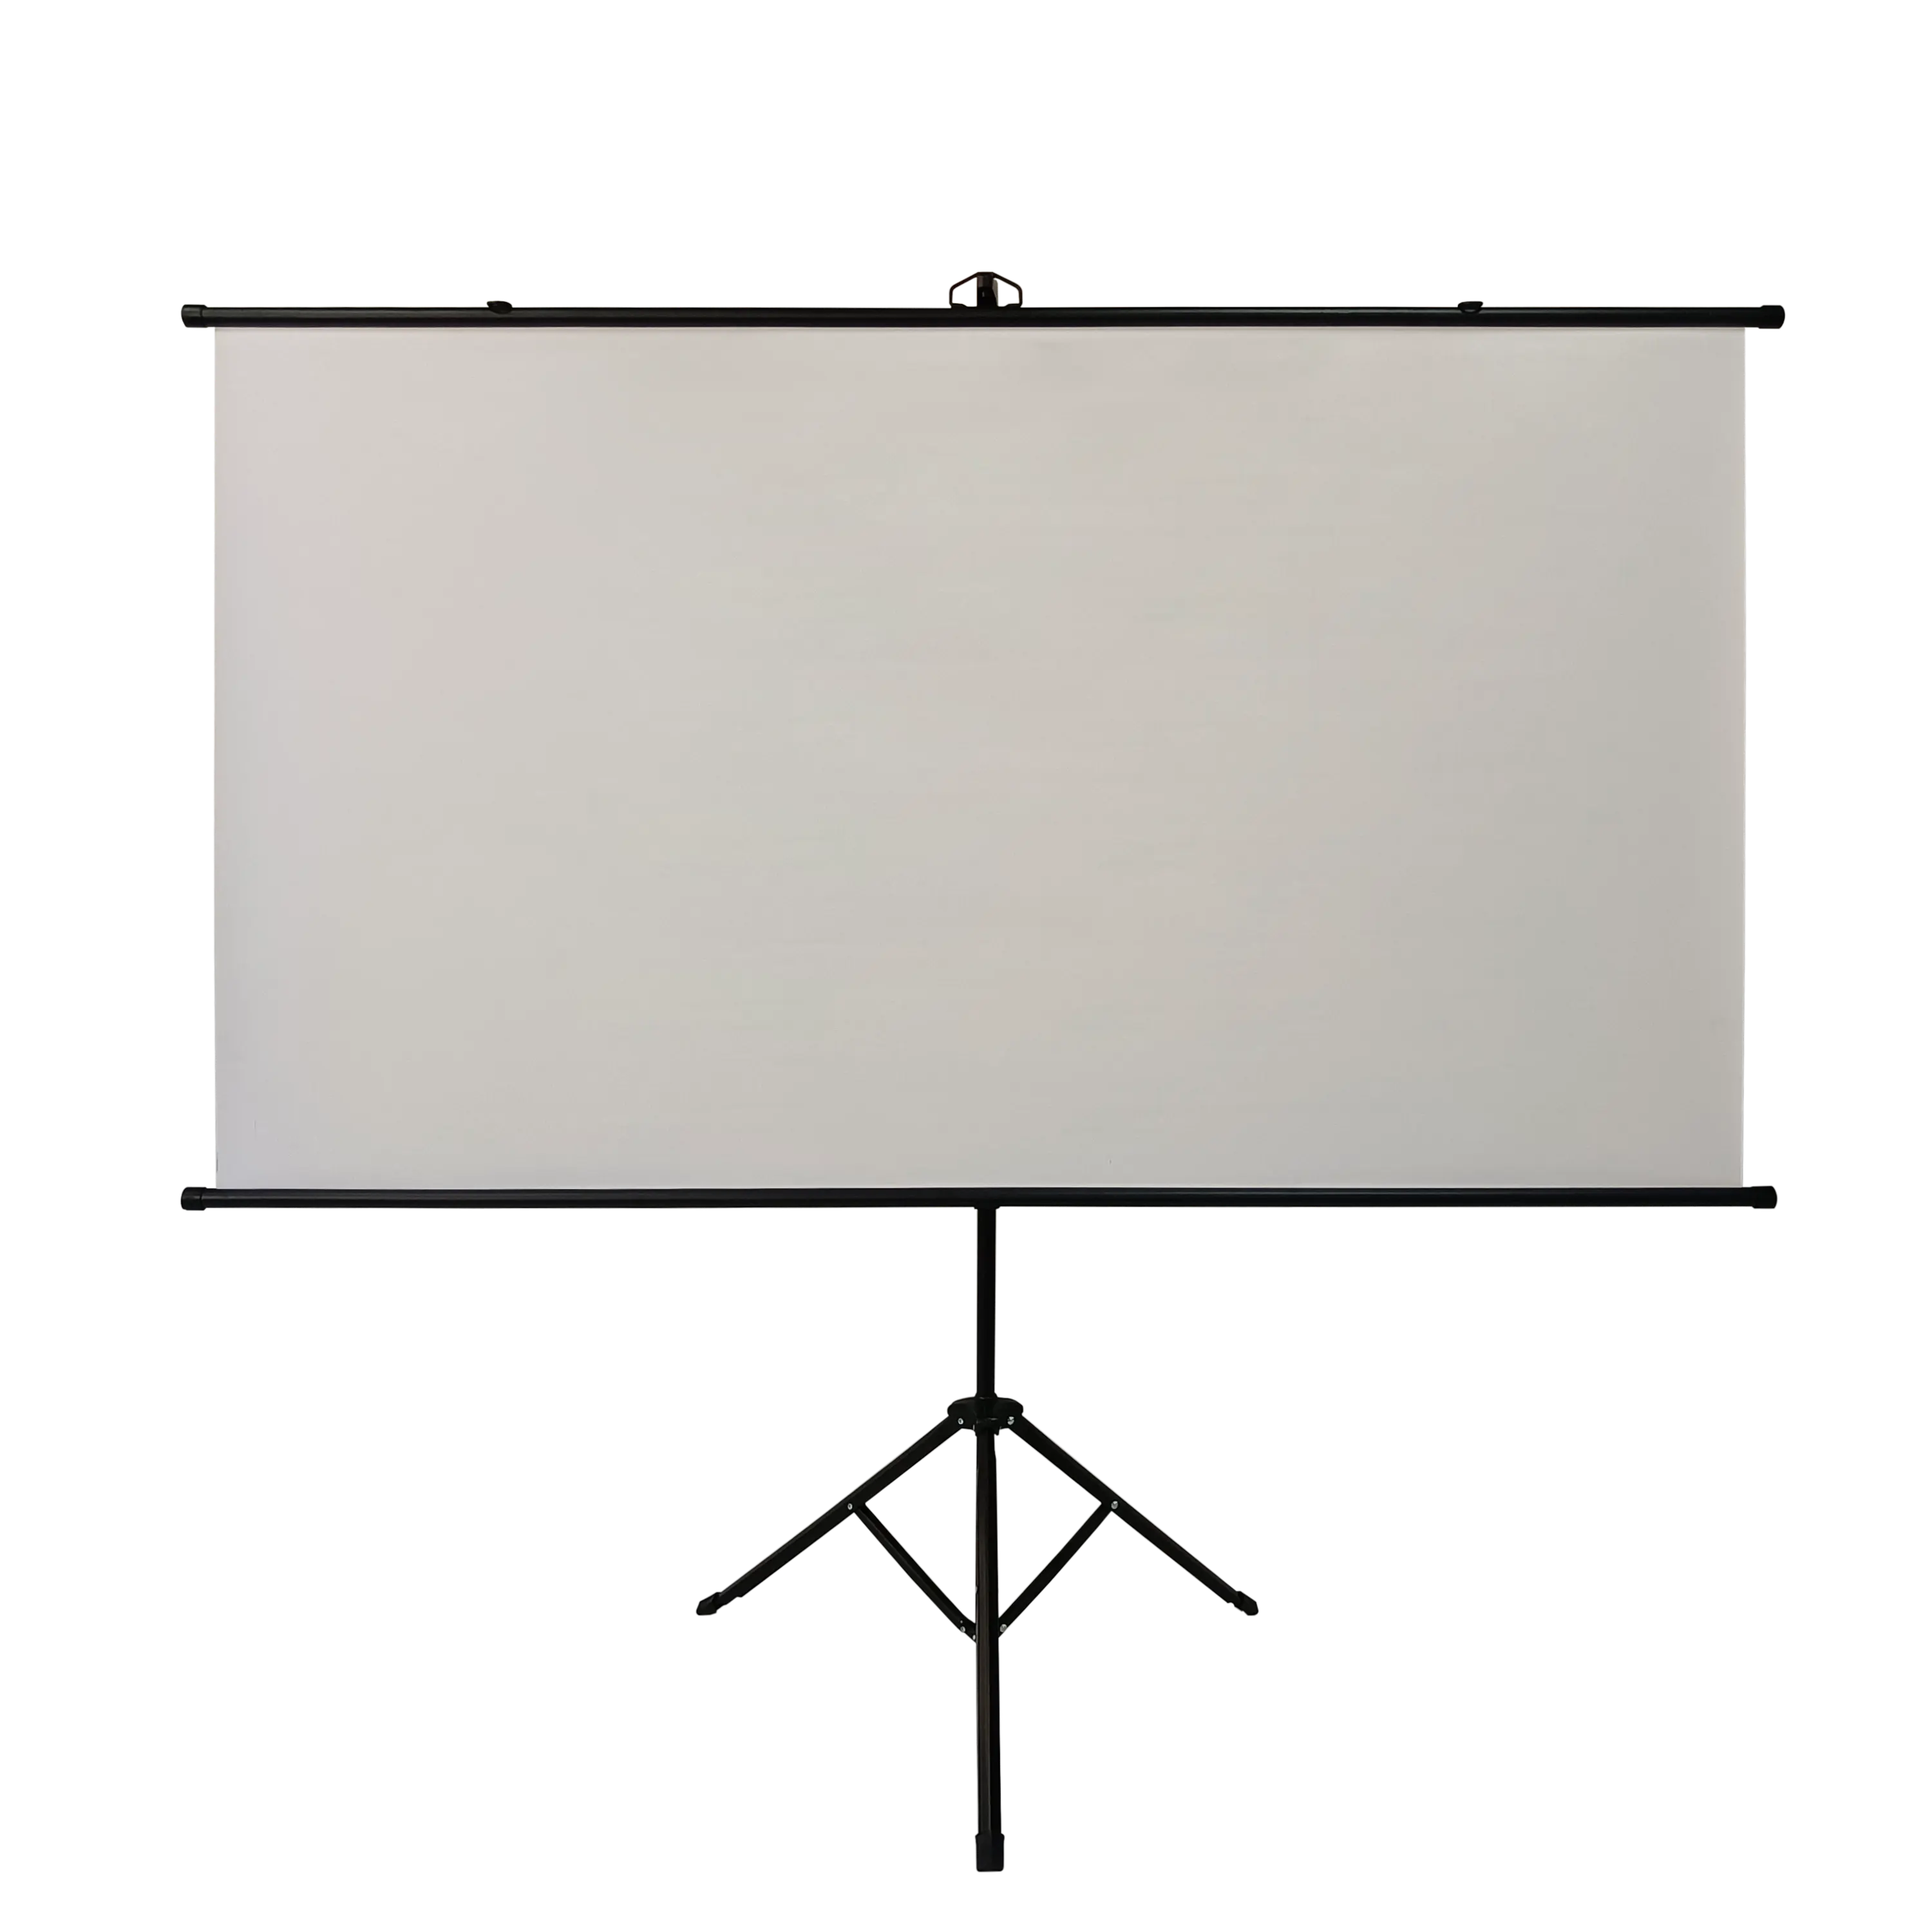 Projection Screens Portable Projector Screen - Mobile Projection Screen Tripod Stand Lightweight Carry Durable-Two Ways To Use